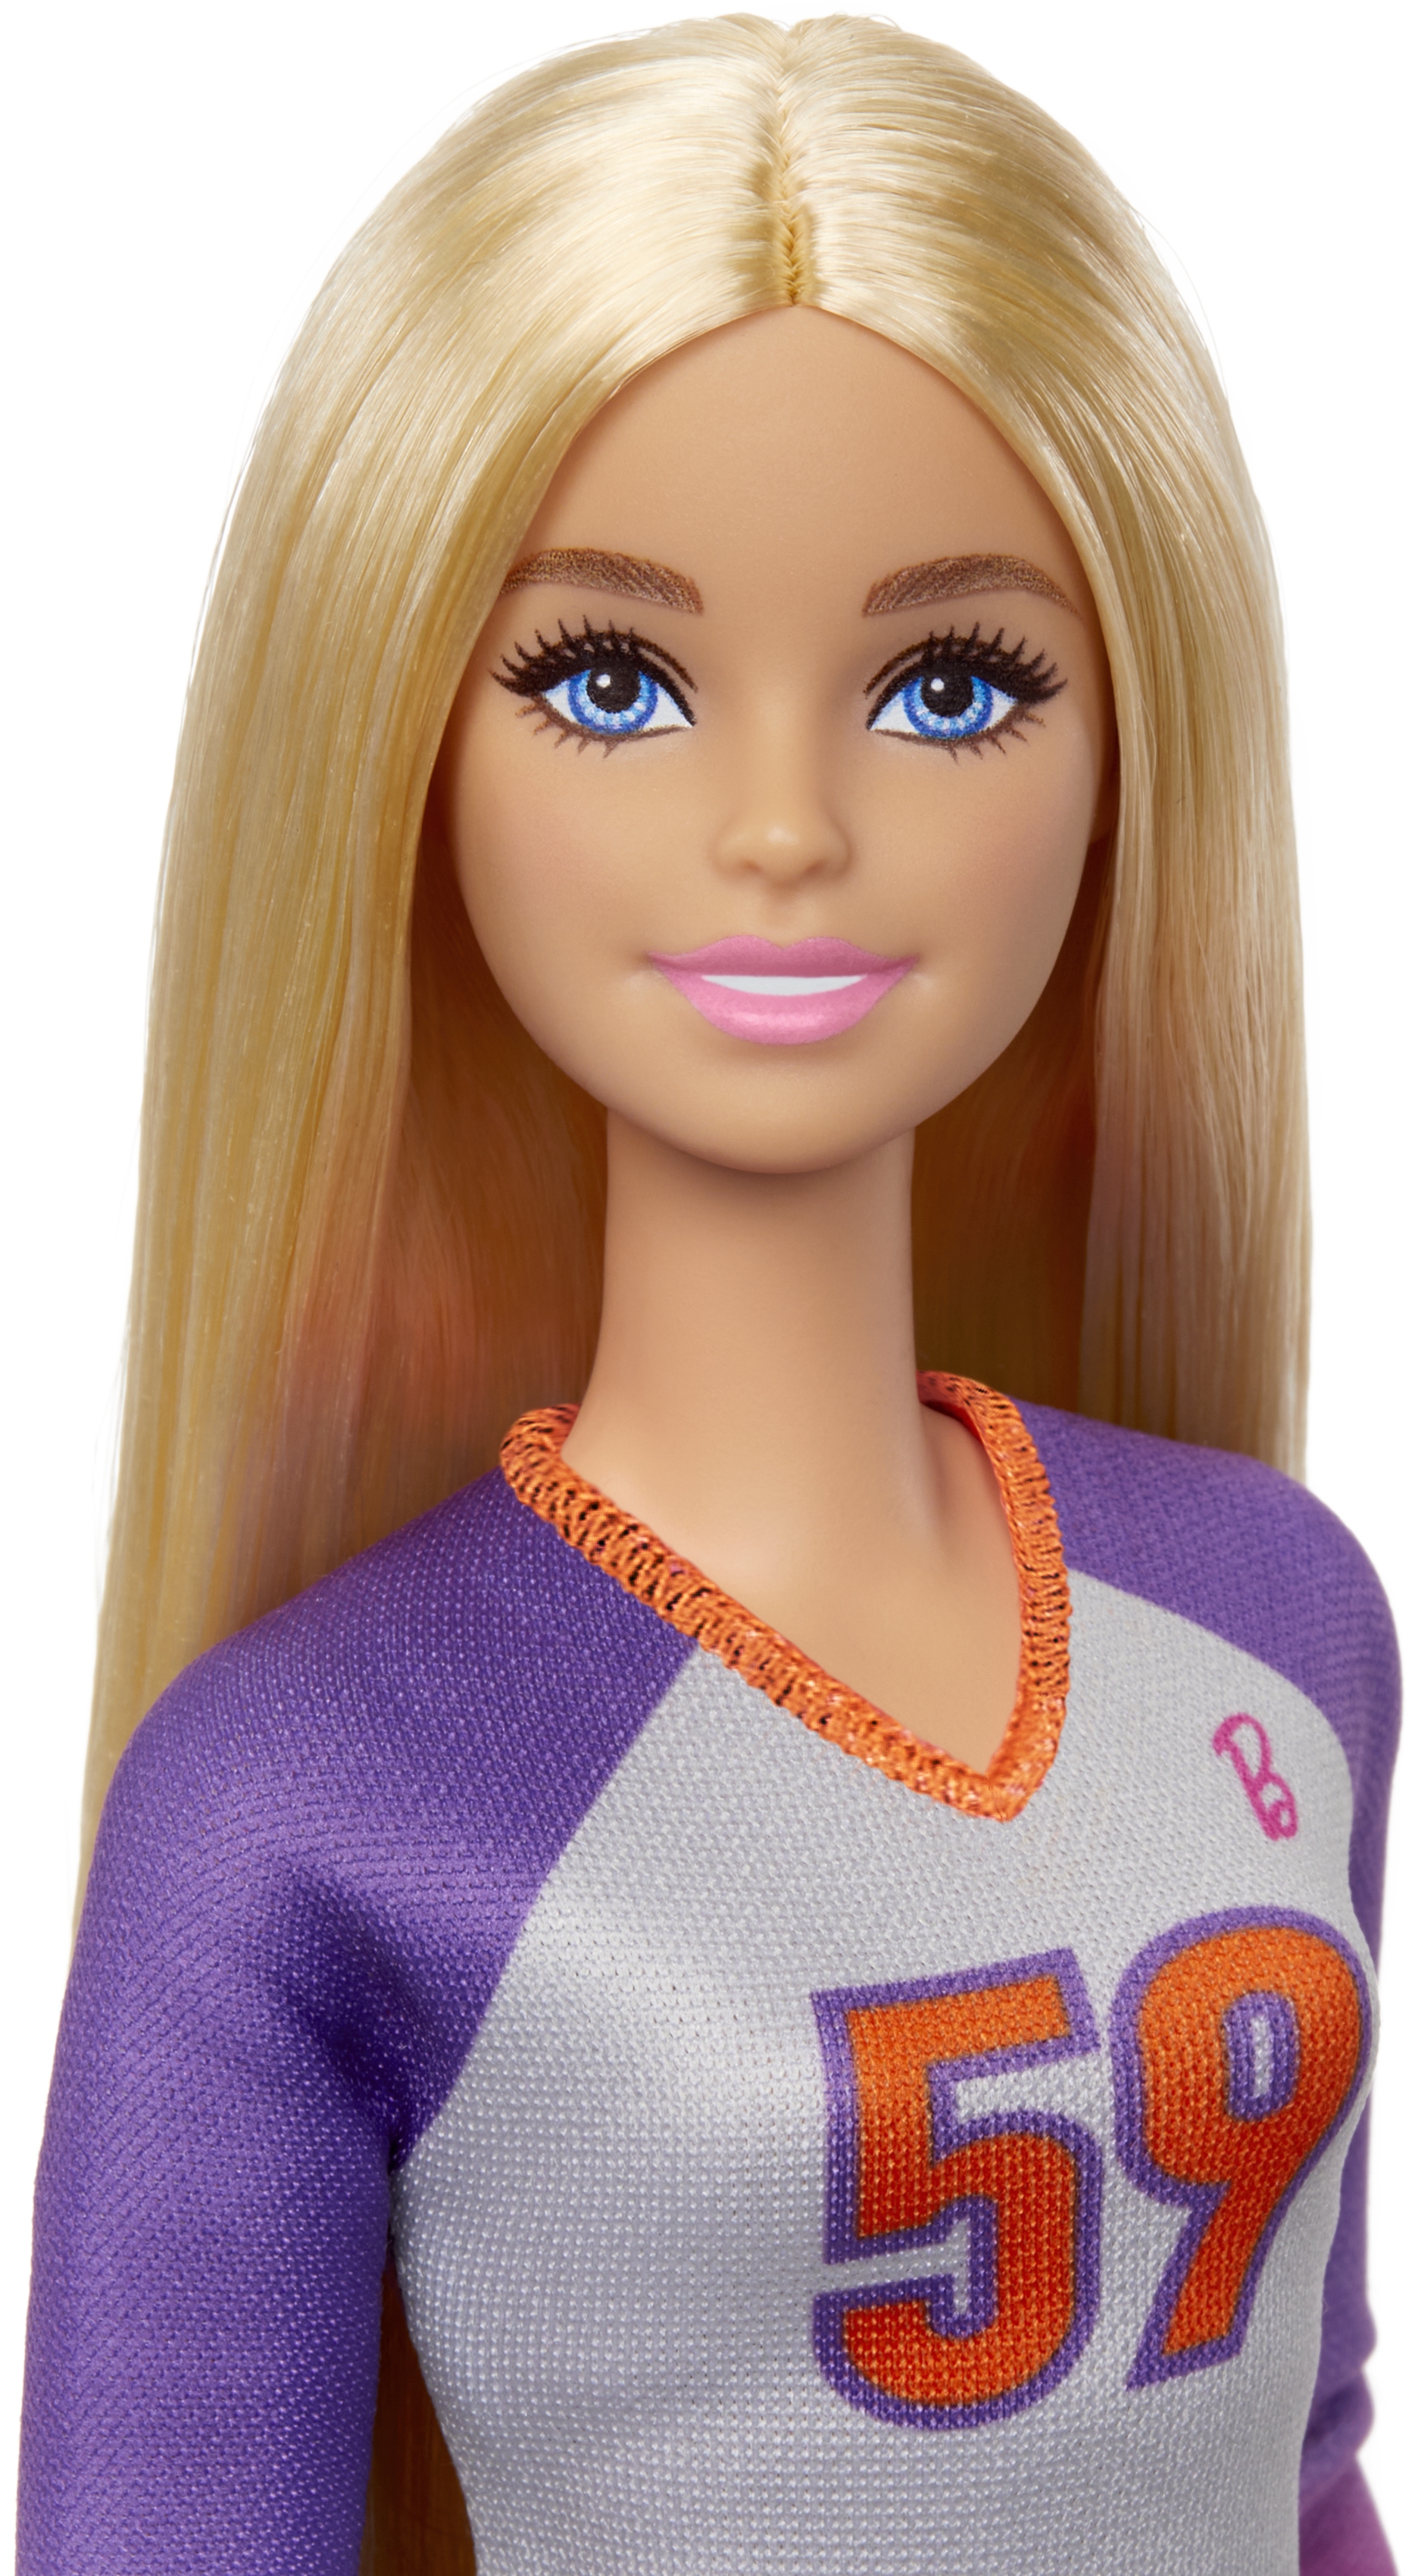 https://www.youloveit.com/uploads/posts/2023-01/1673626266_youloveit_com_barbie_made_to_move_doll_2023_volleyball_player4.jpg